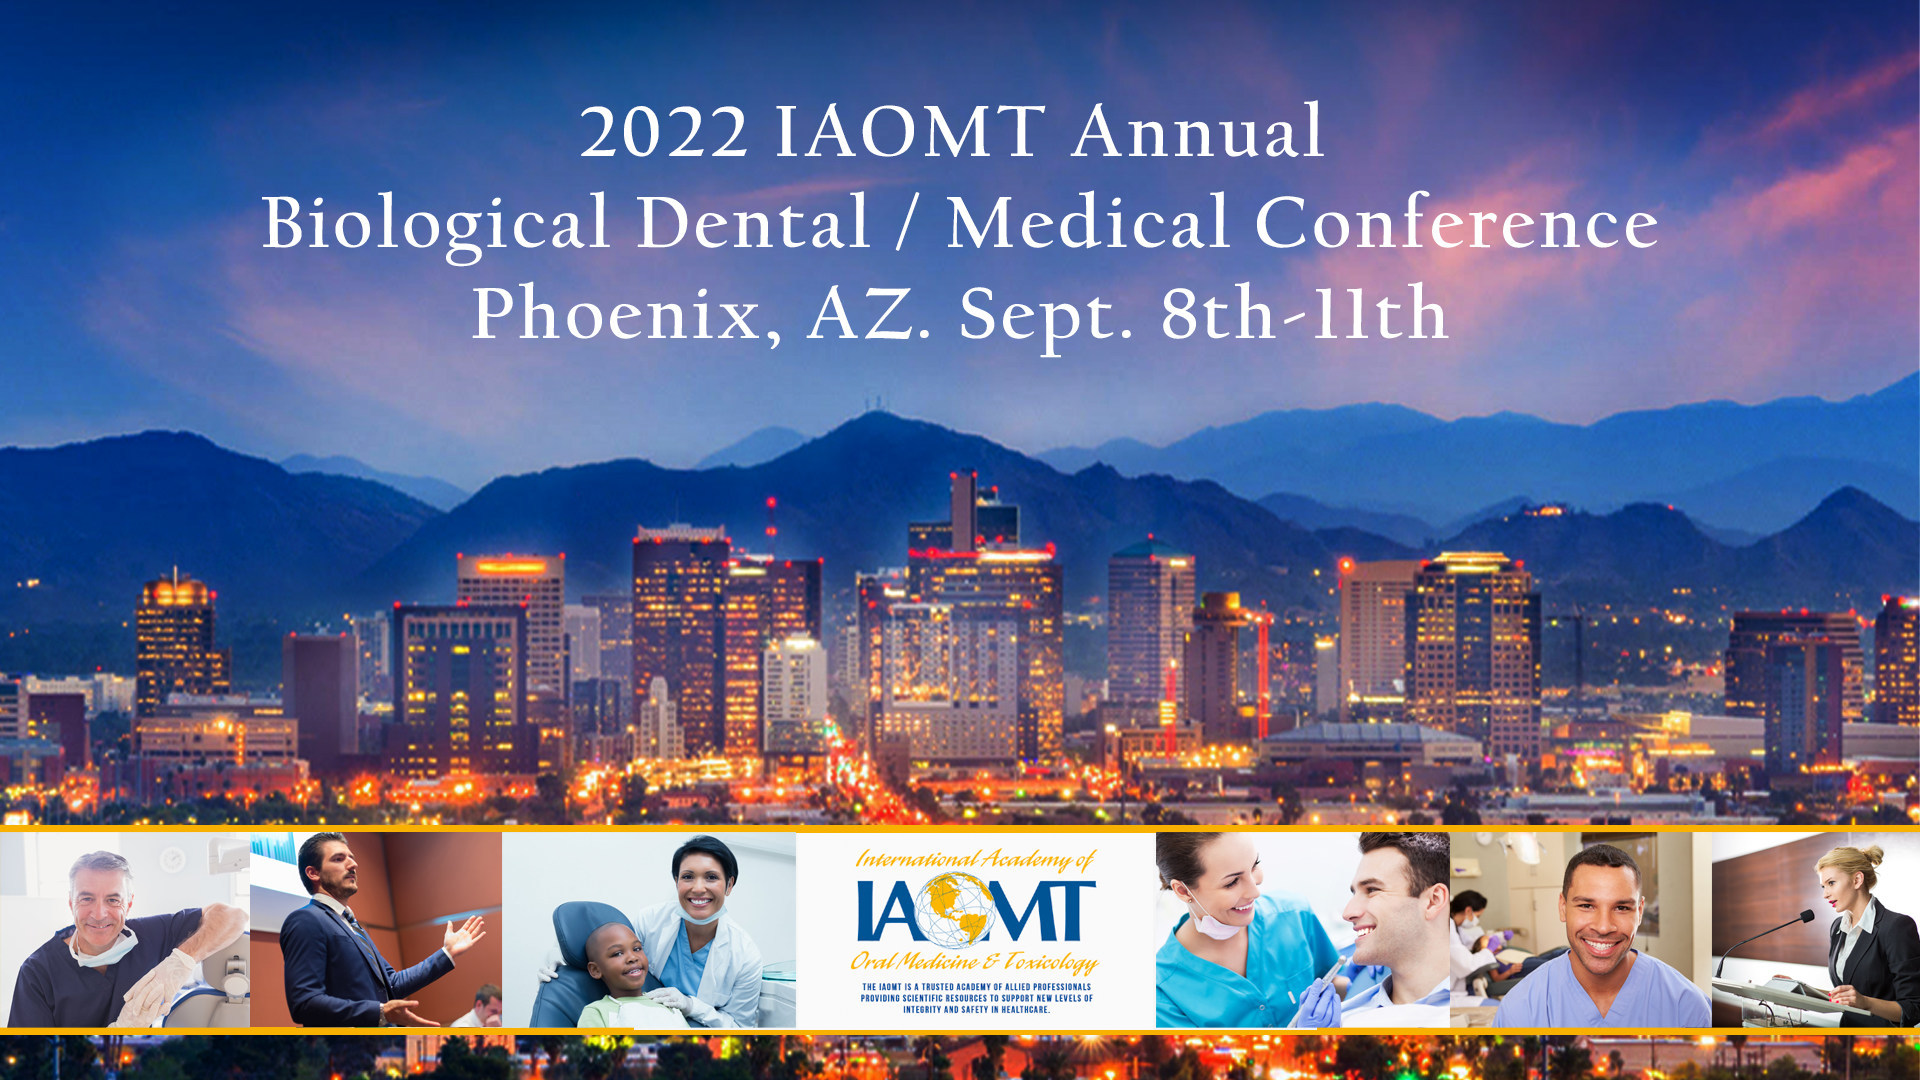 Integrative Organic Dental Convention hosted through the IAOMT